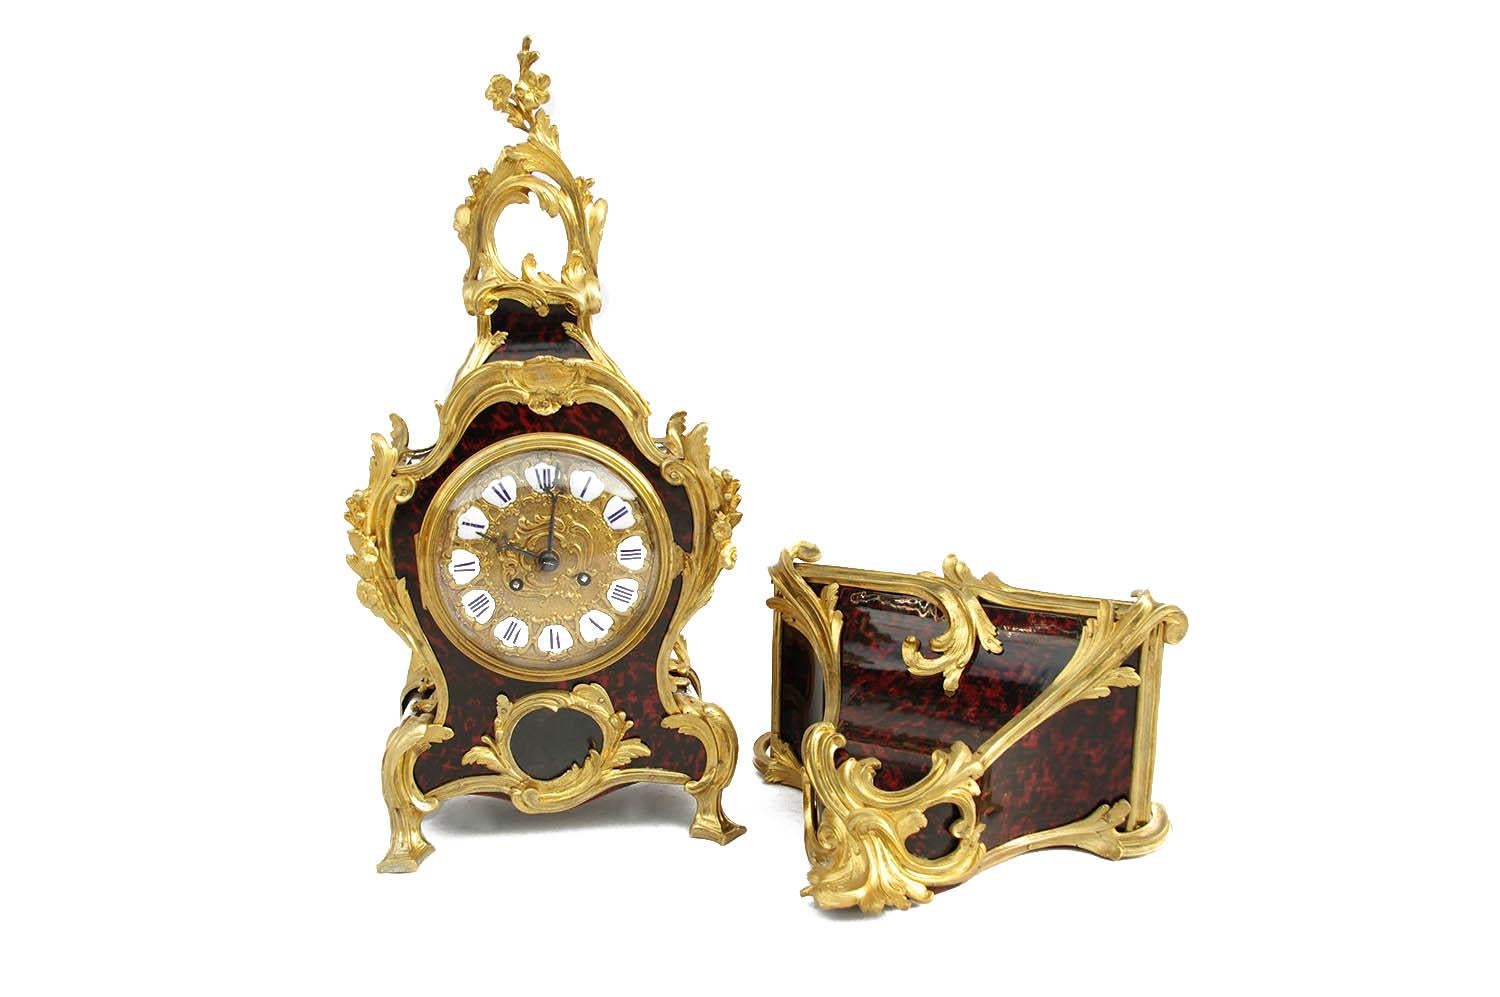 Louis XV style clock and its console in tortoise red scale and chiselled and gilt bronze.
Violin shaped clock standing on four gilt bronze legs and front adorned with a glazed cartouche permitting to see the pendulum. 
Rich chiselled and gilt